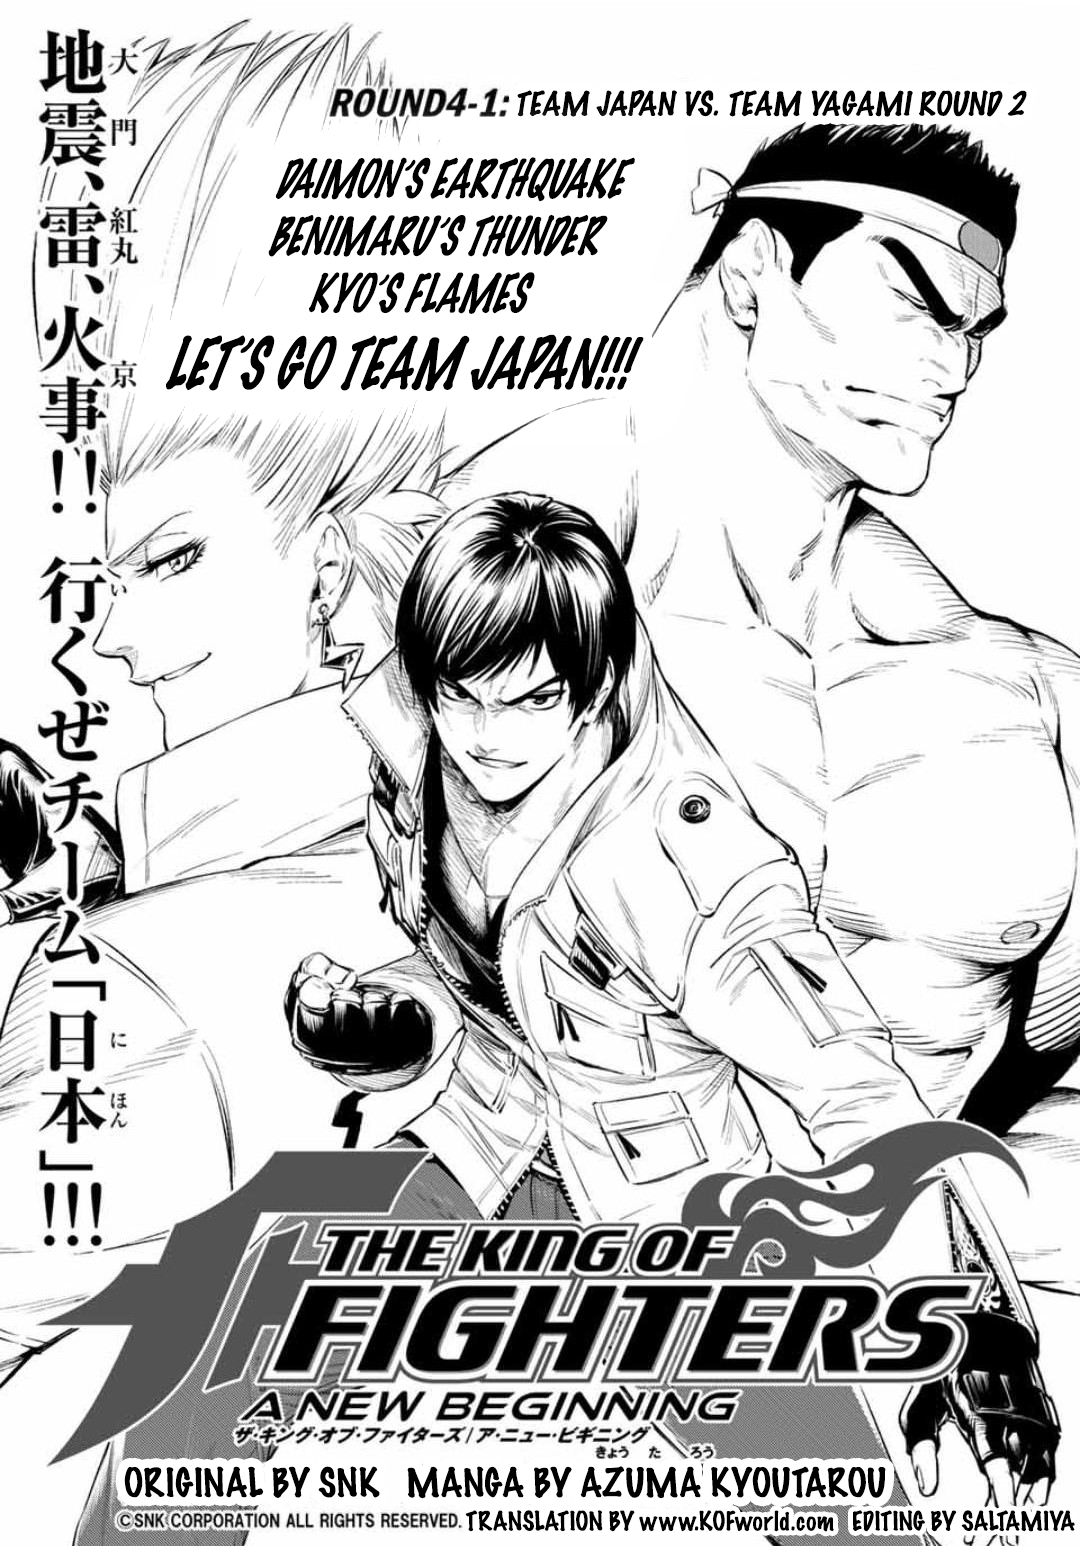 The King of Fighters: A New Beginning Vol. 1 Ch. 4.1 Team Japan vs Team Yagami 2nd